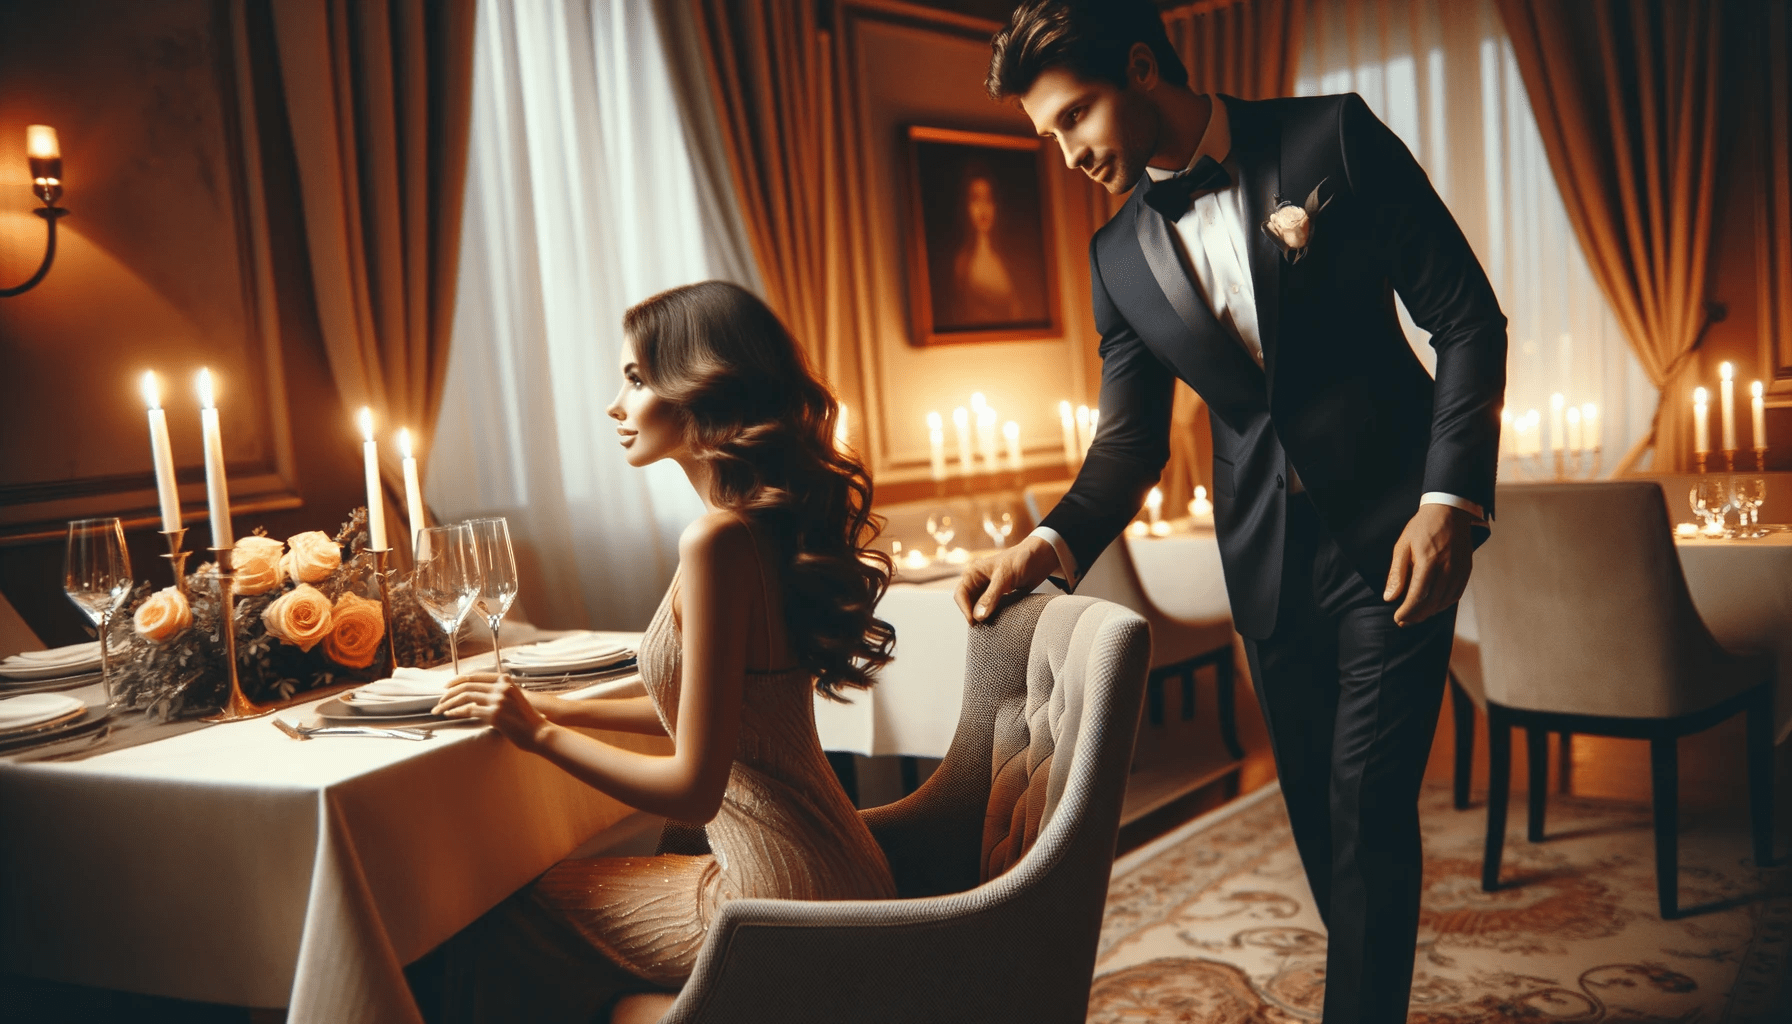 gentleman in a sharp suit pulling out a chair for a beautiful lady at an elegant restaurant with soft candlelight setting a romantic ambi